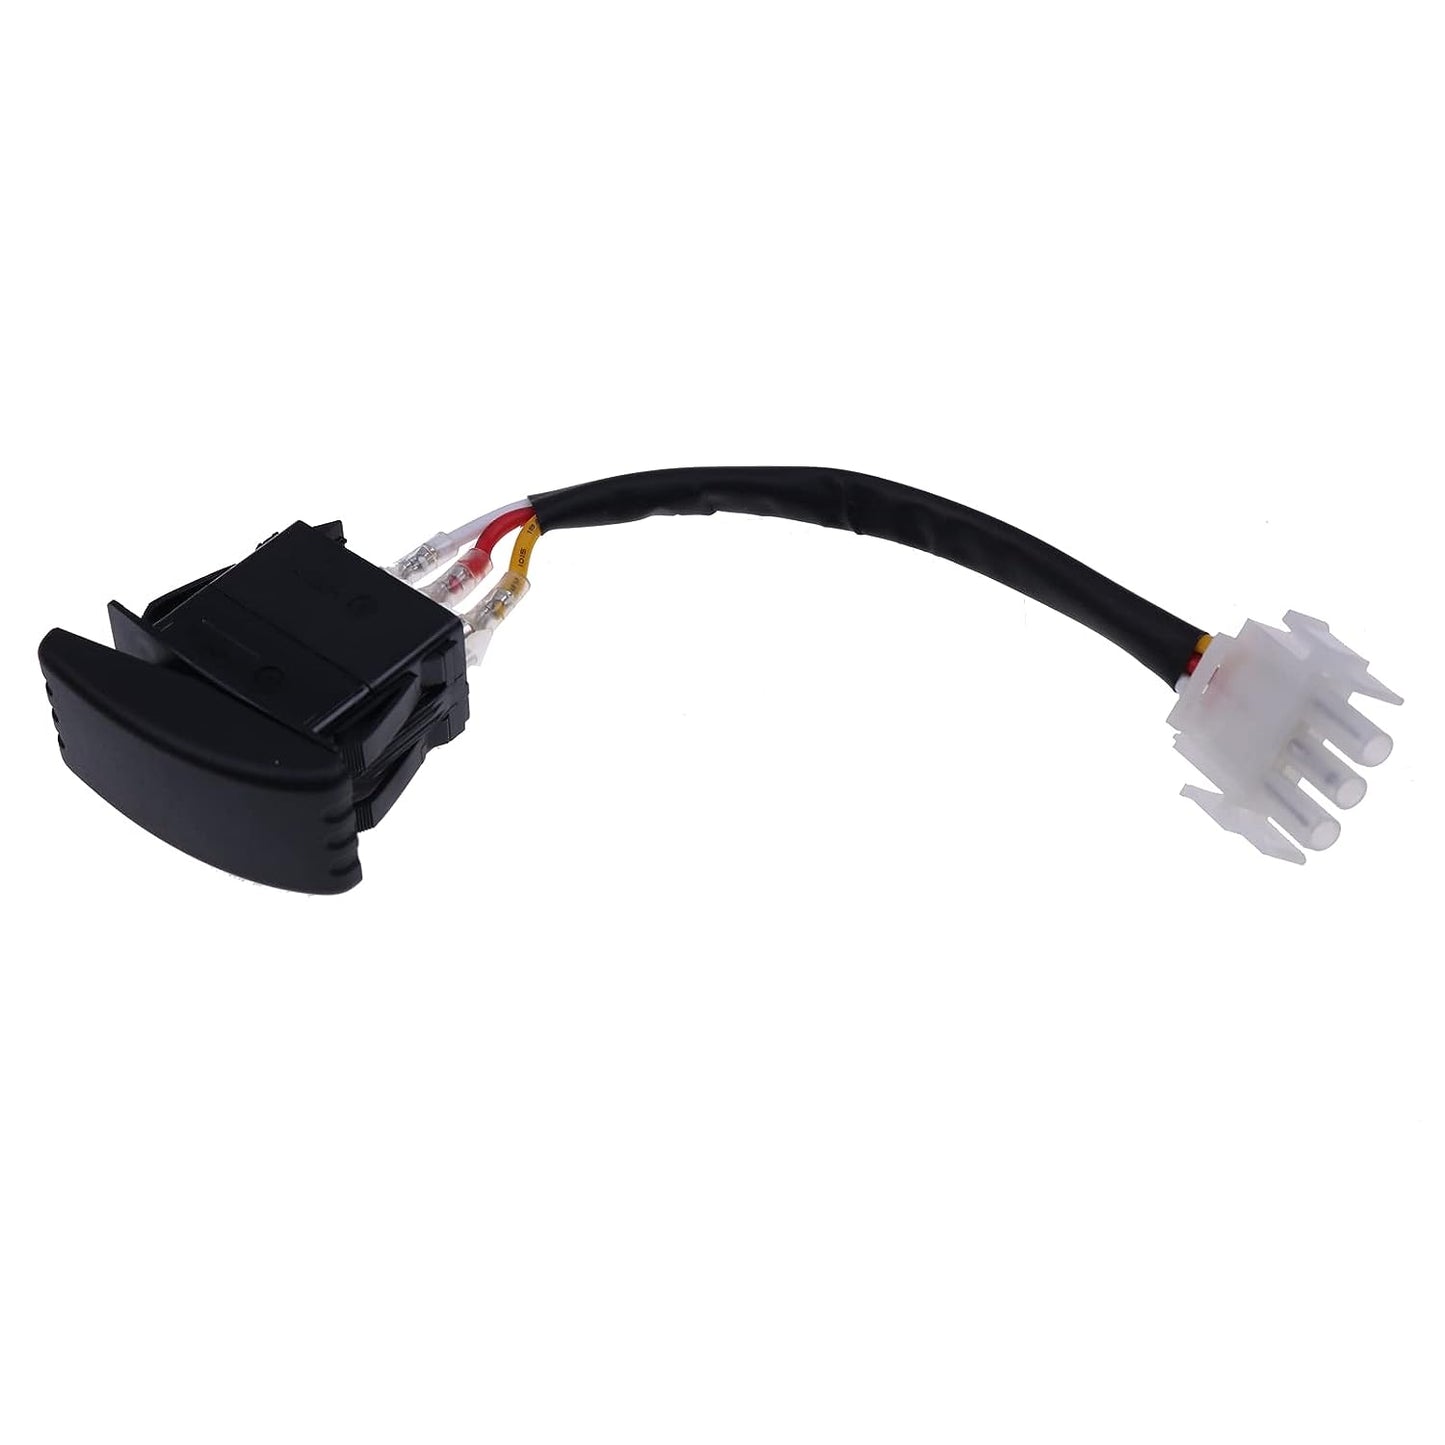 JR1-H2917-10 Forward Reverse Switch Compatible With 1996-2004 Yamaha G19 G22 Golf Carts